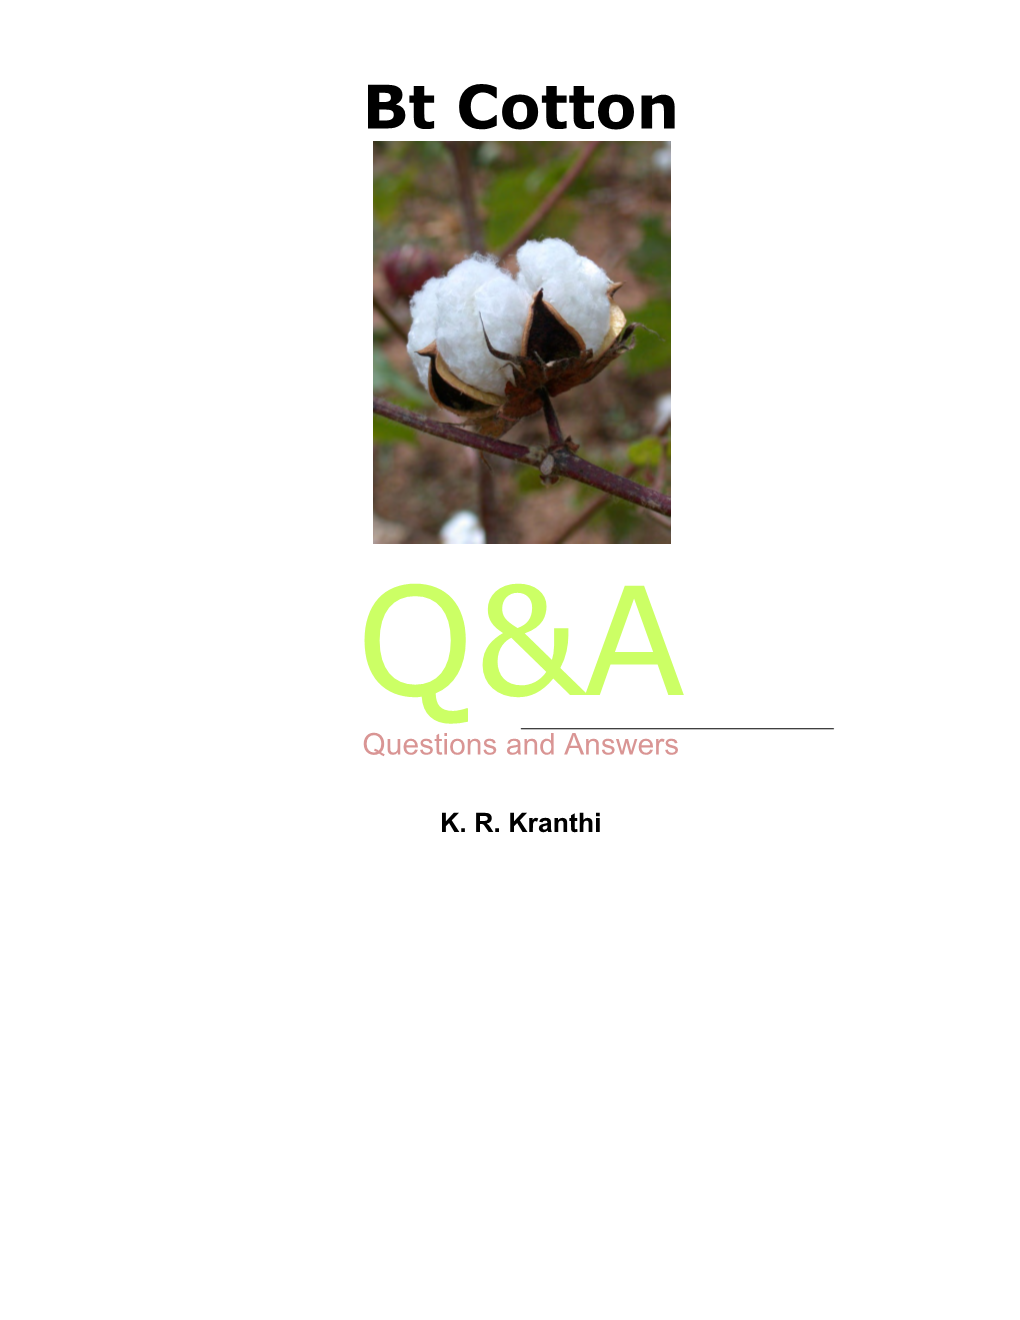 Bt Cotton Questions & Answers